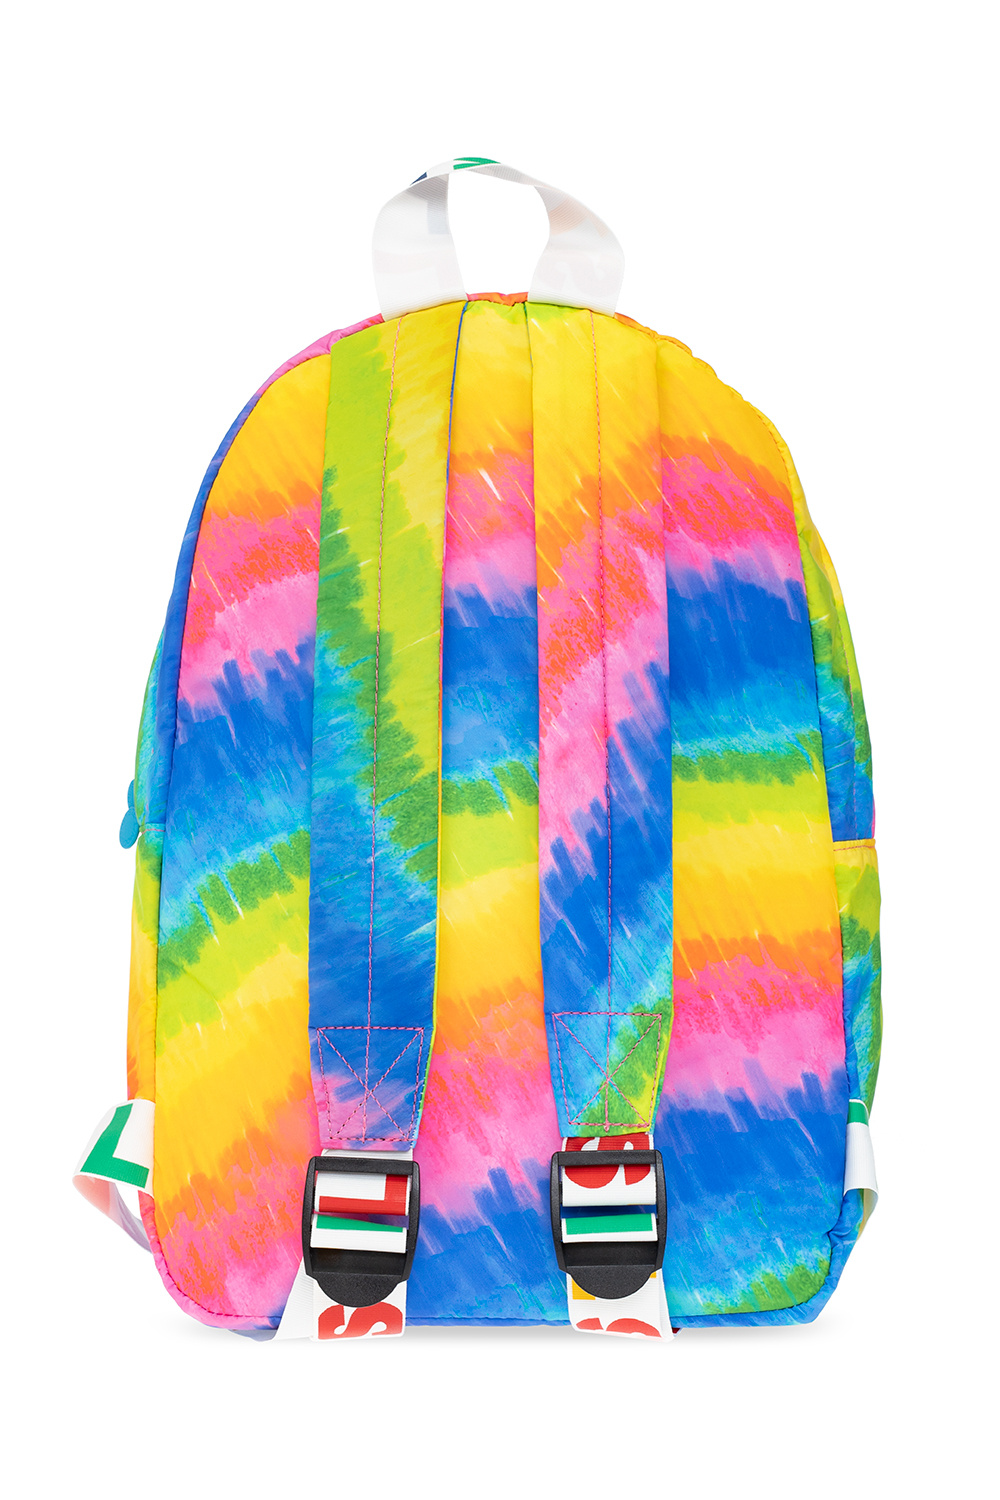 stella pants McCartney Kids Backpack in recycled fabric